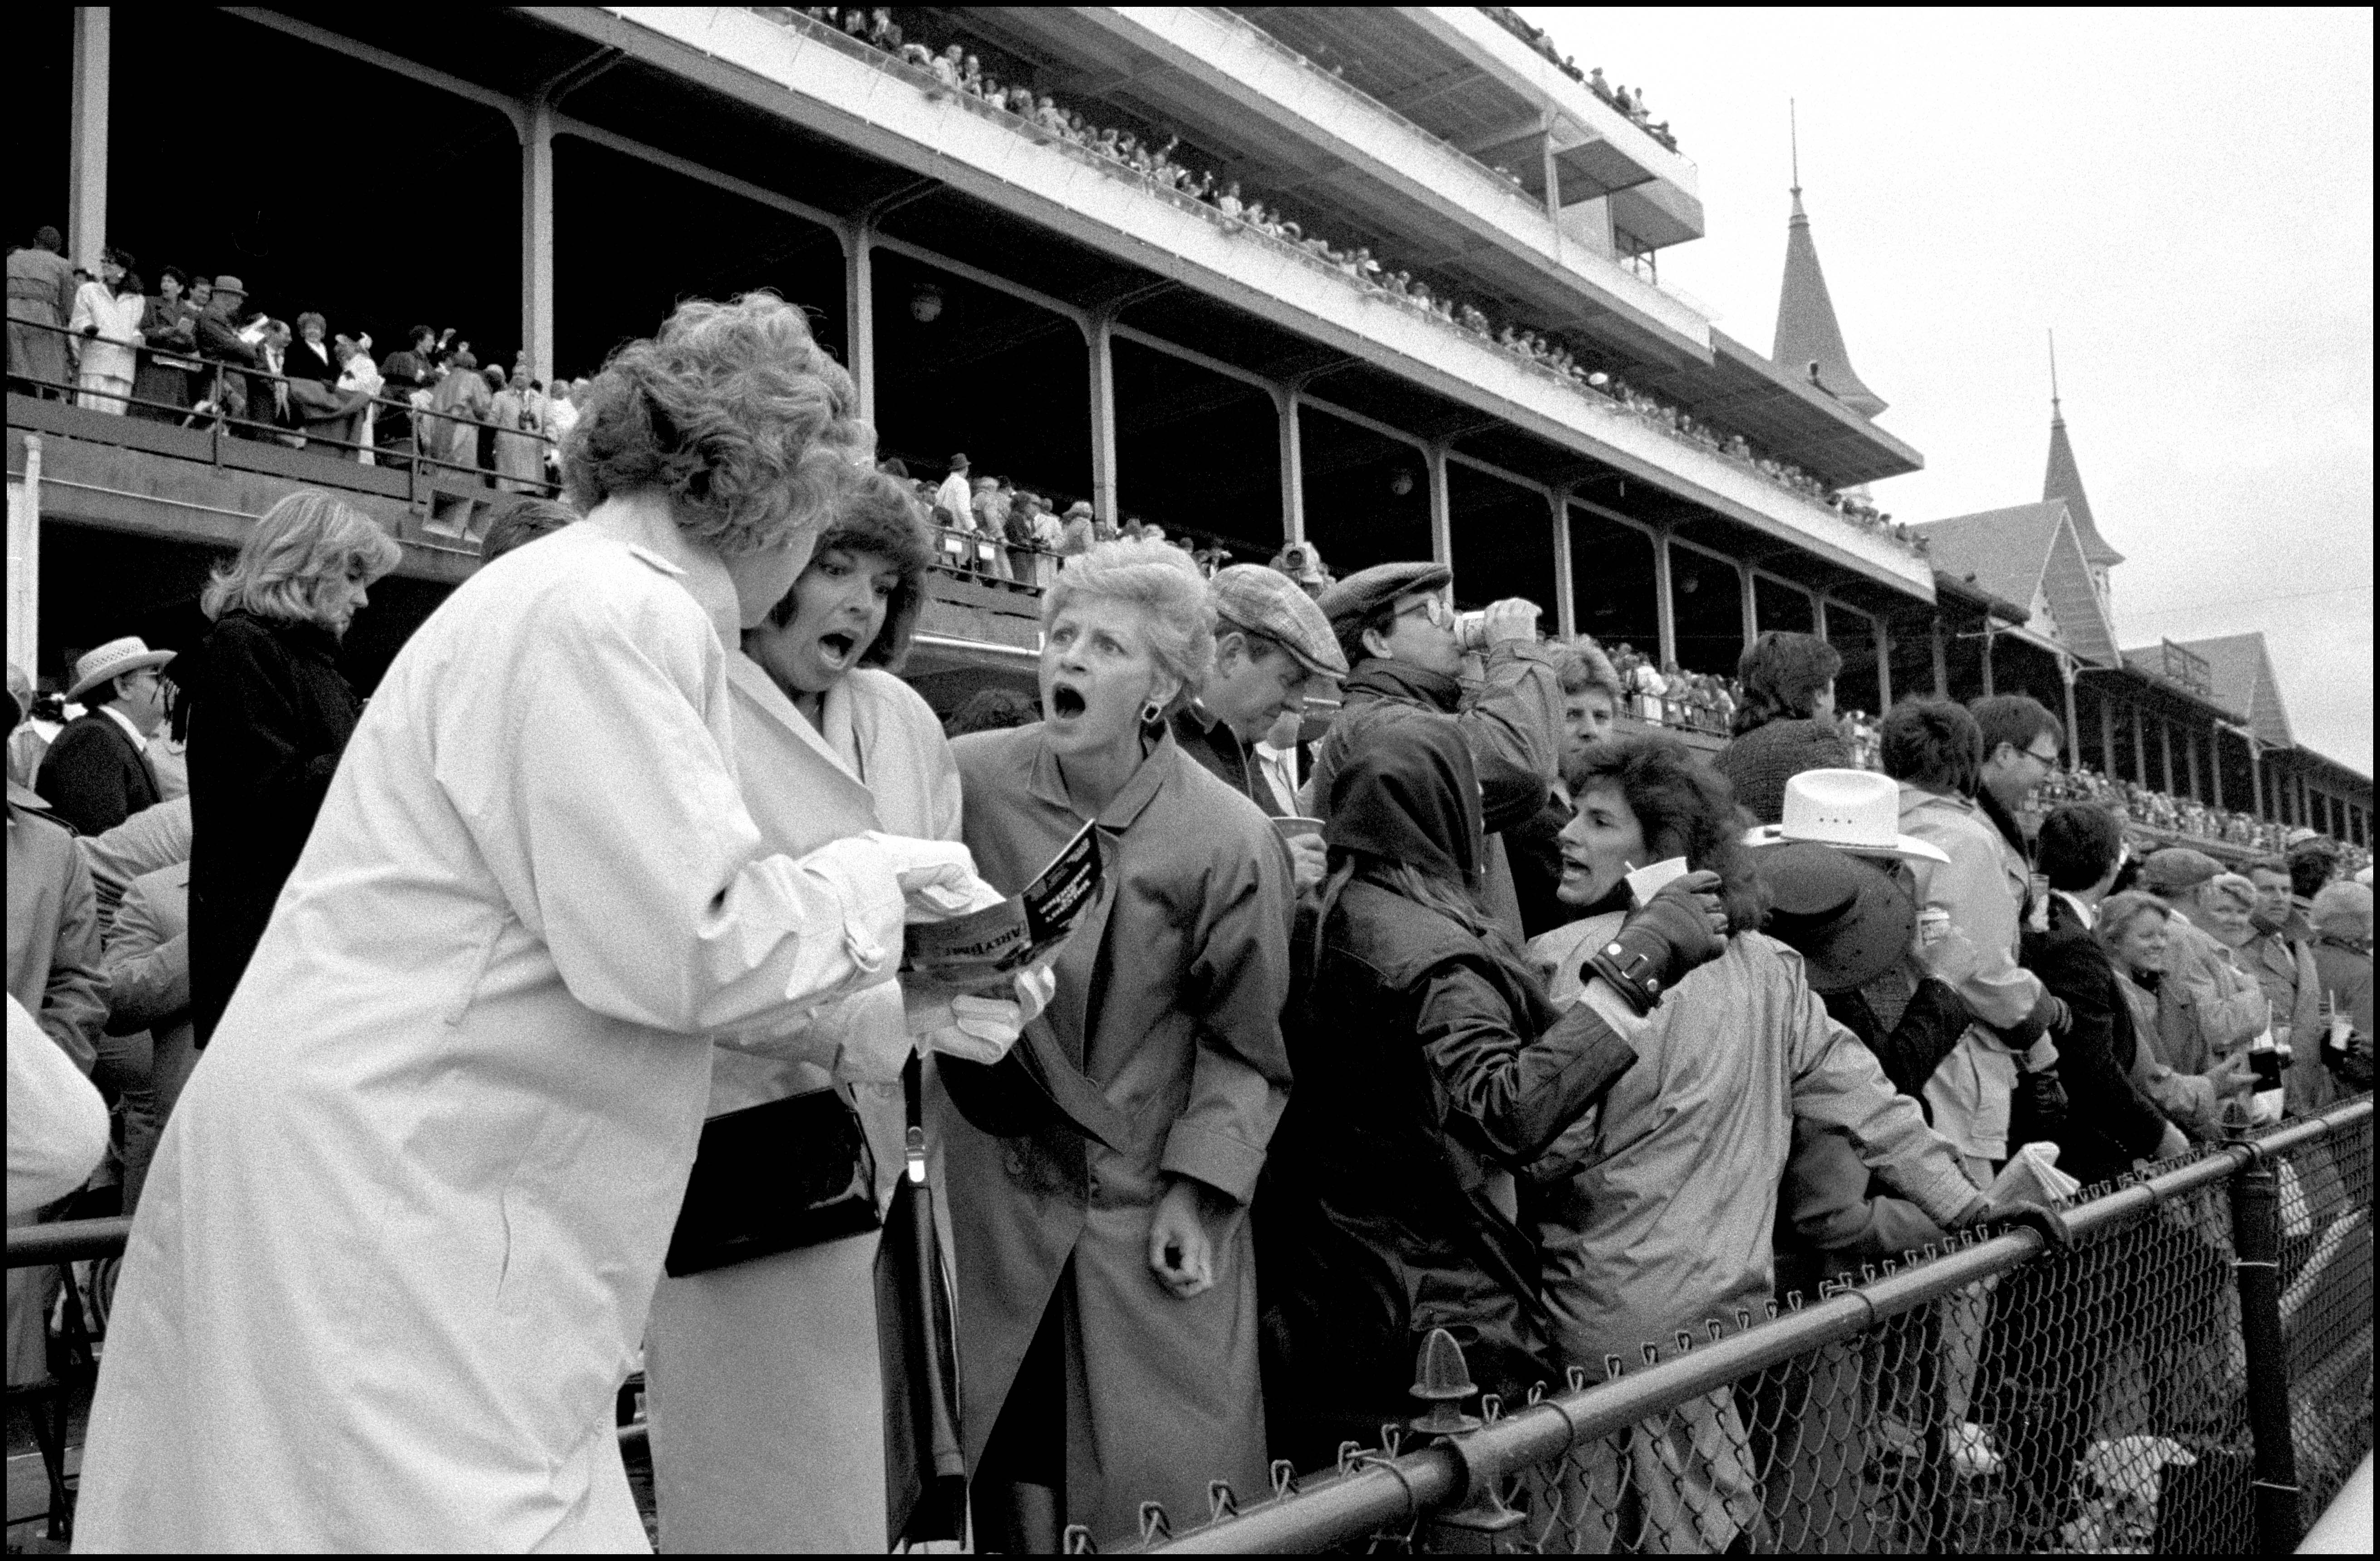 People stand against the railing at a horse race.